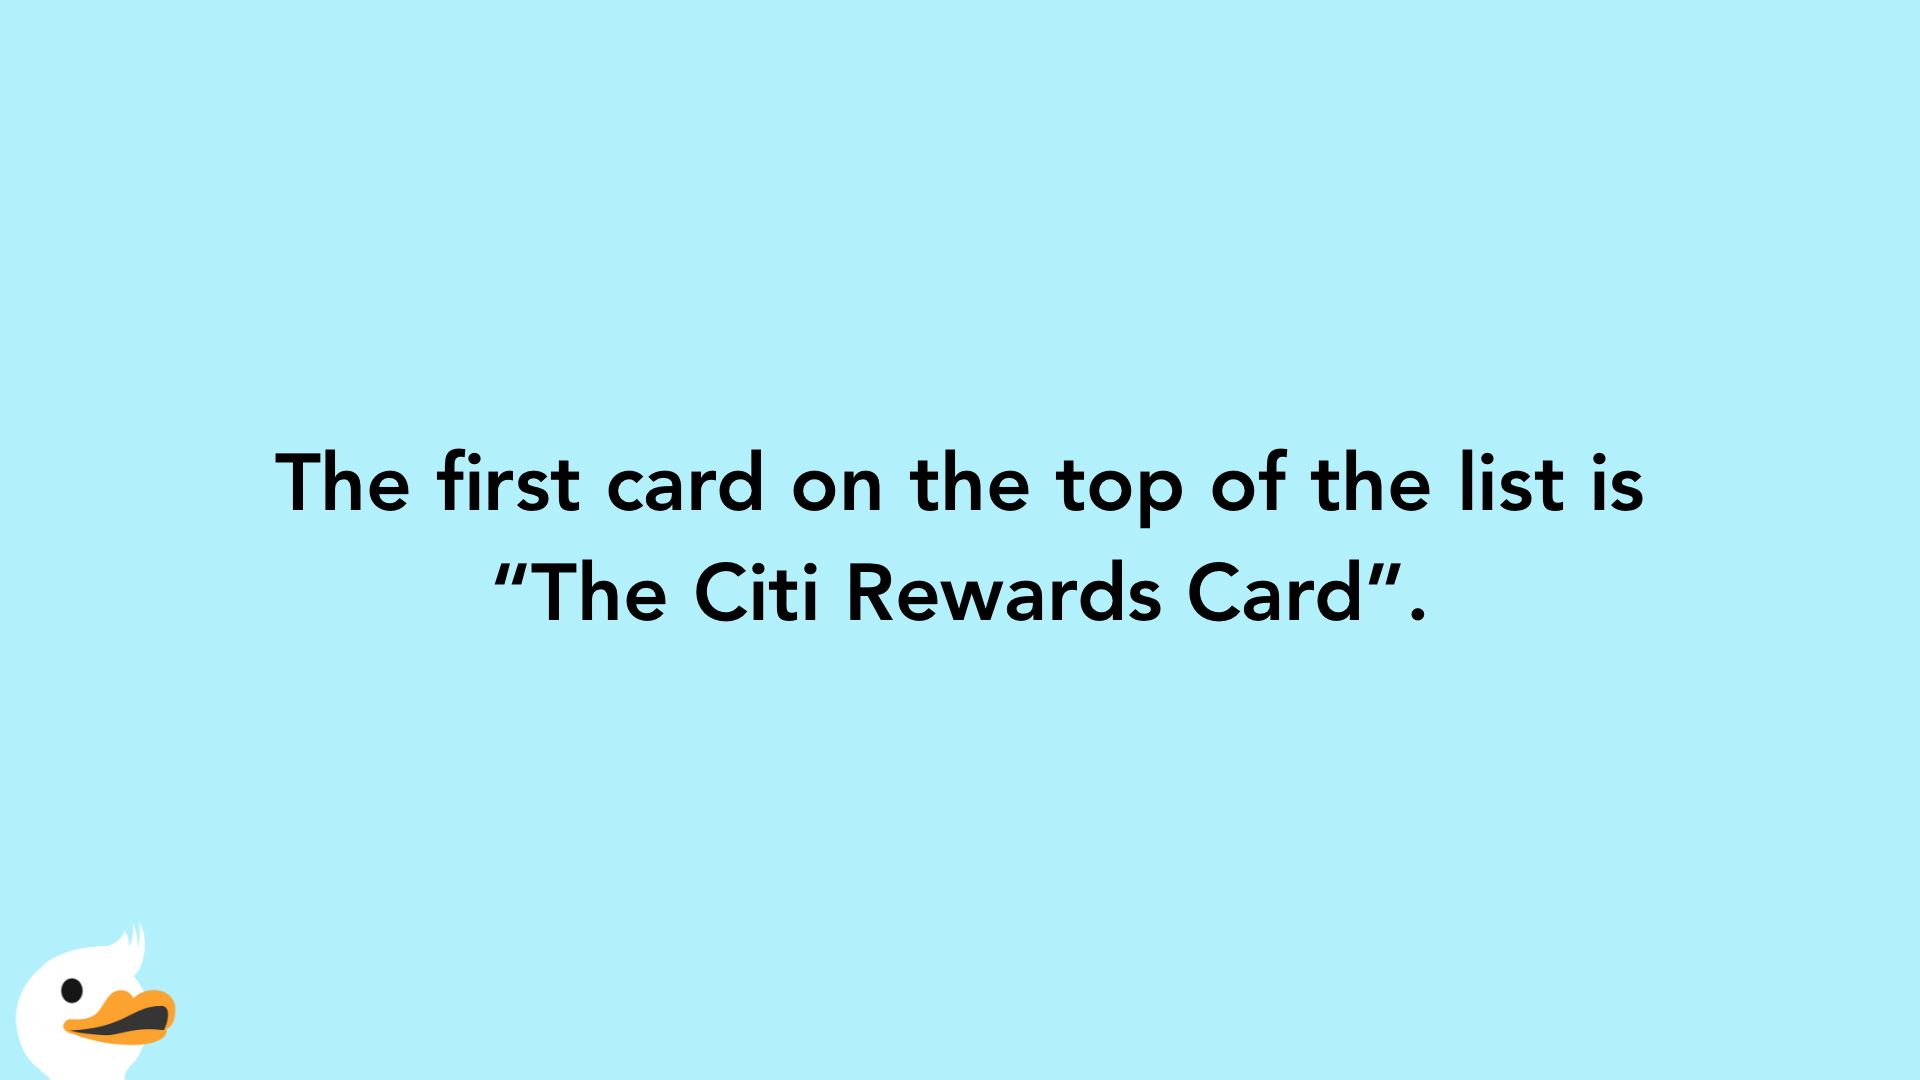 The first card on the top of the list is “The Citi Rewards Card”.